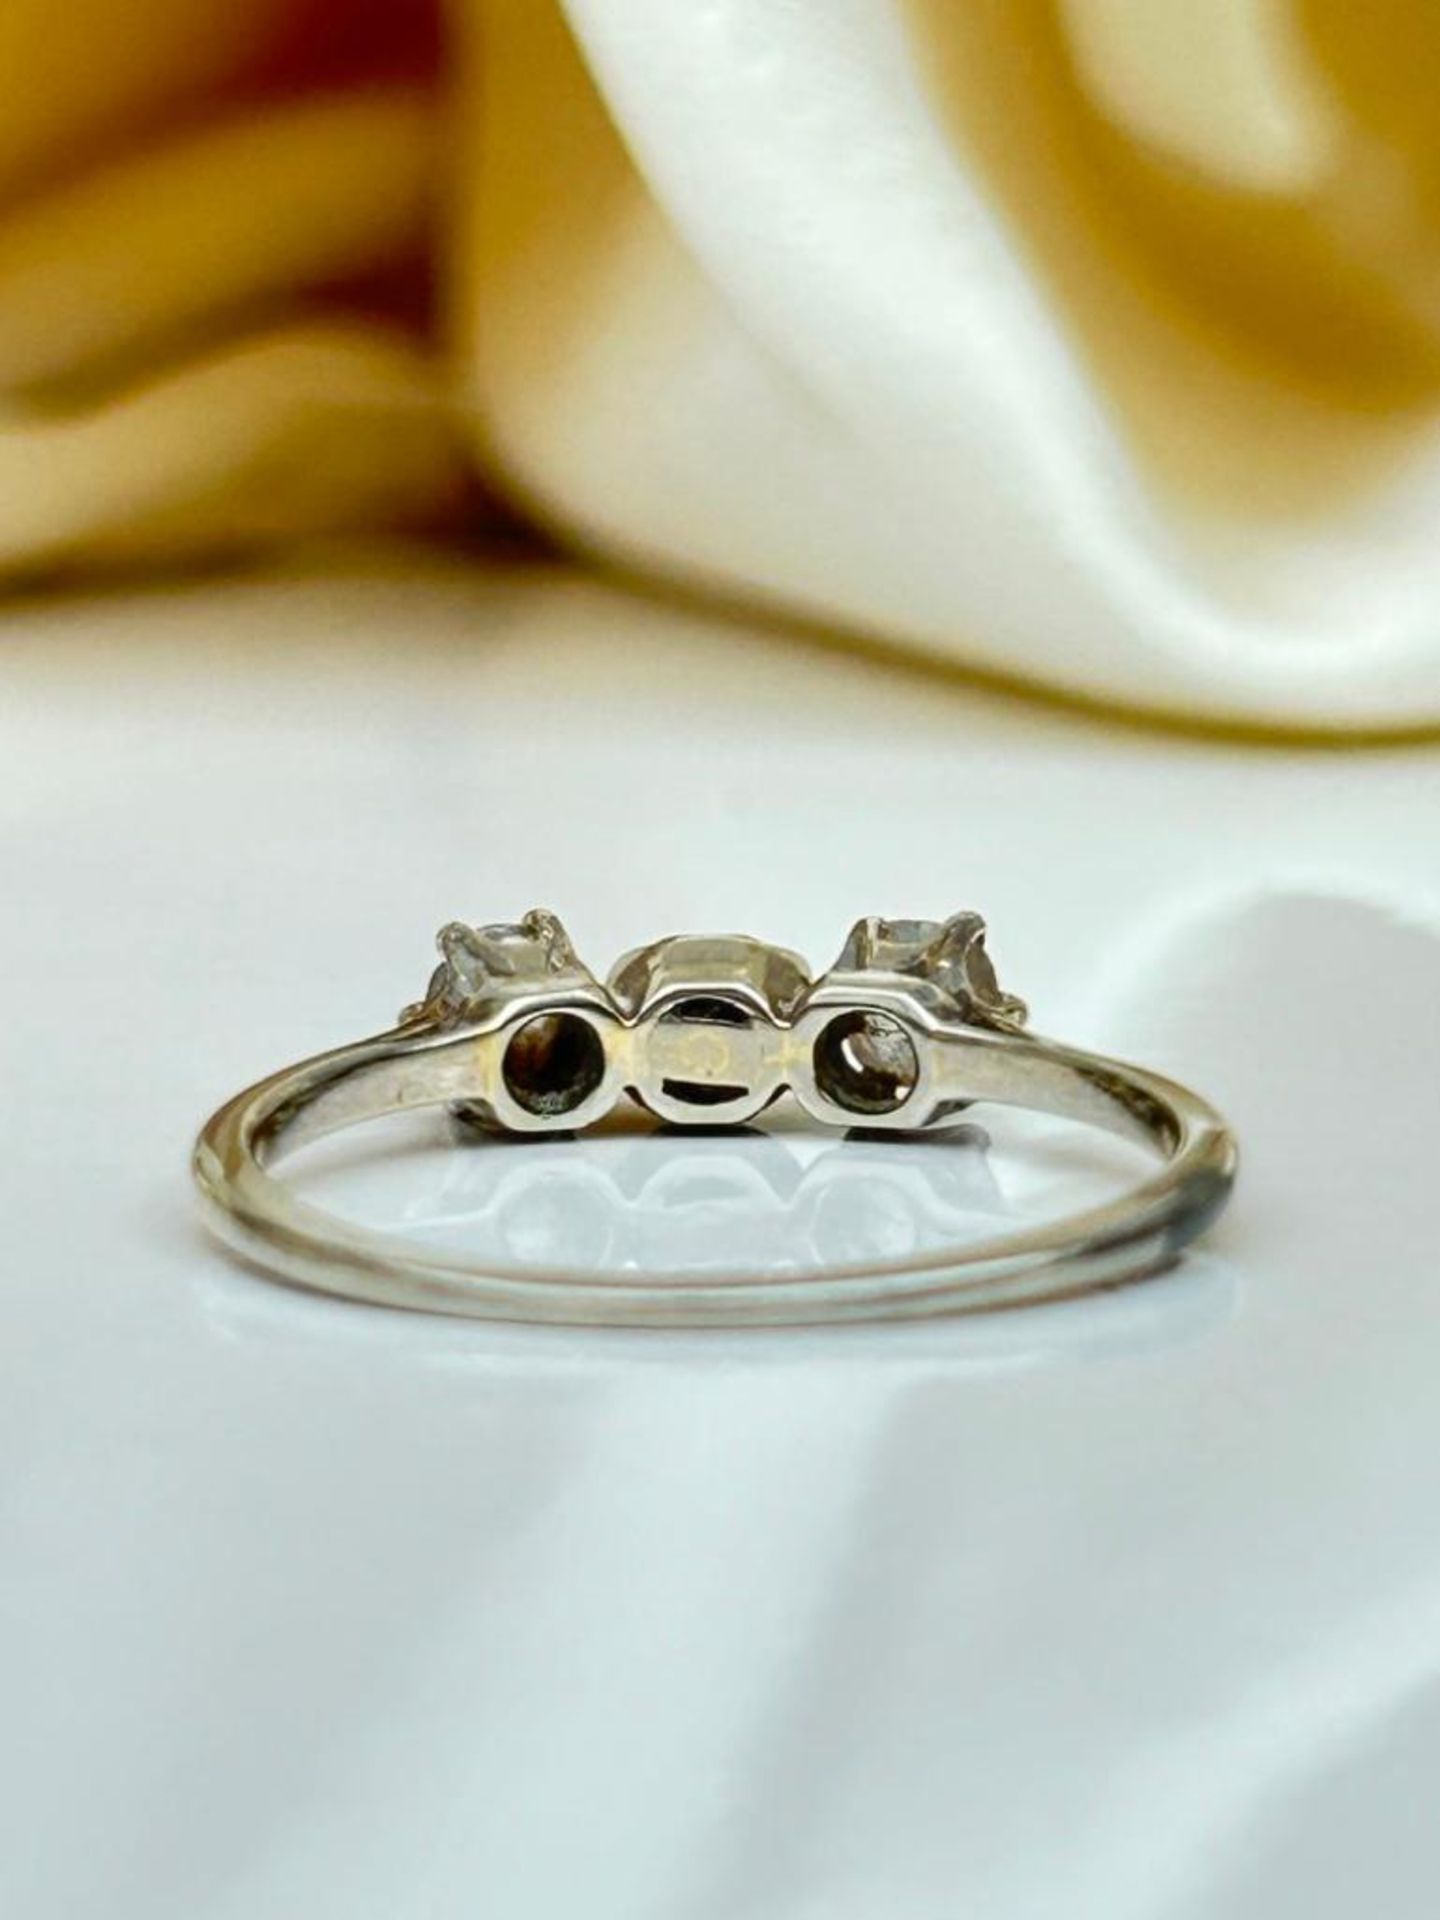 Antique White Gold Pearl and Diamond 3 Stone Ring - Image 7 of 7